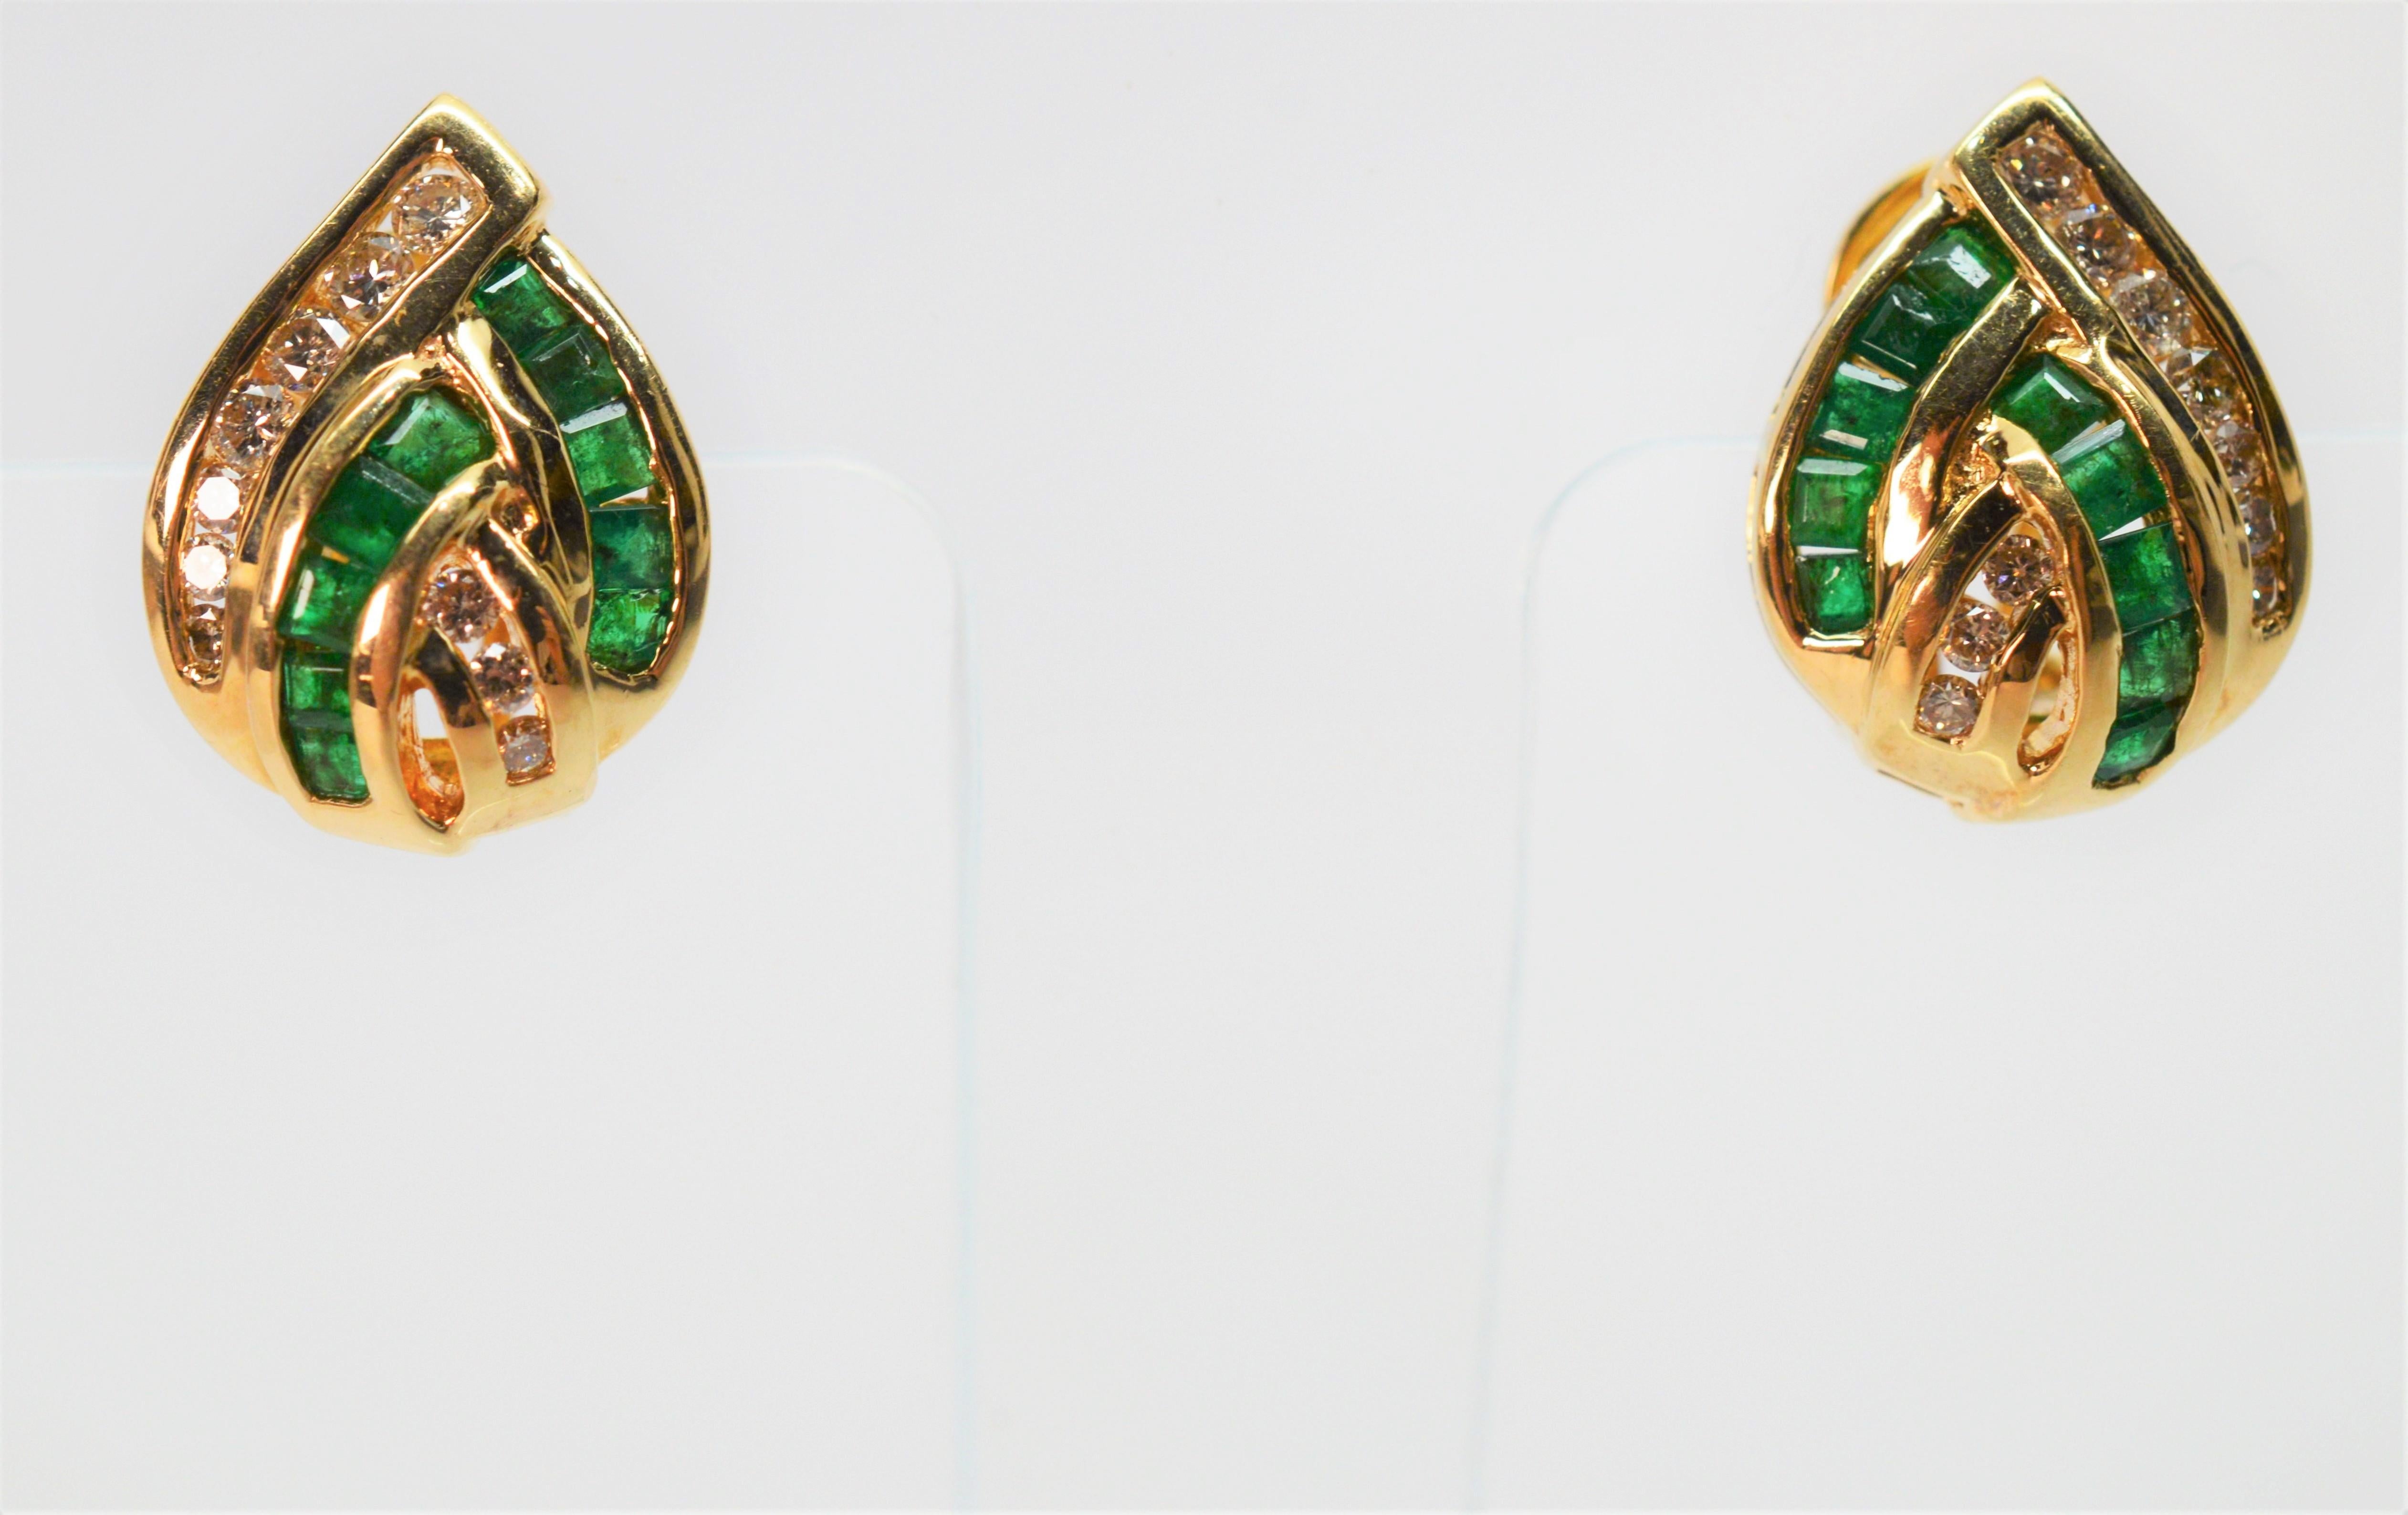 A jeweled twist of yellow gold creates this teardrop shaped earring pair,  showcasing vibrant hand cut square emeralds .40 carat total weight and round diamonds .40 carats total weight.
Measuring 5/8 inch long and 1/2 inch wide and is stud style